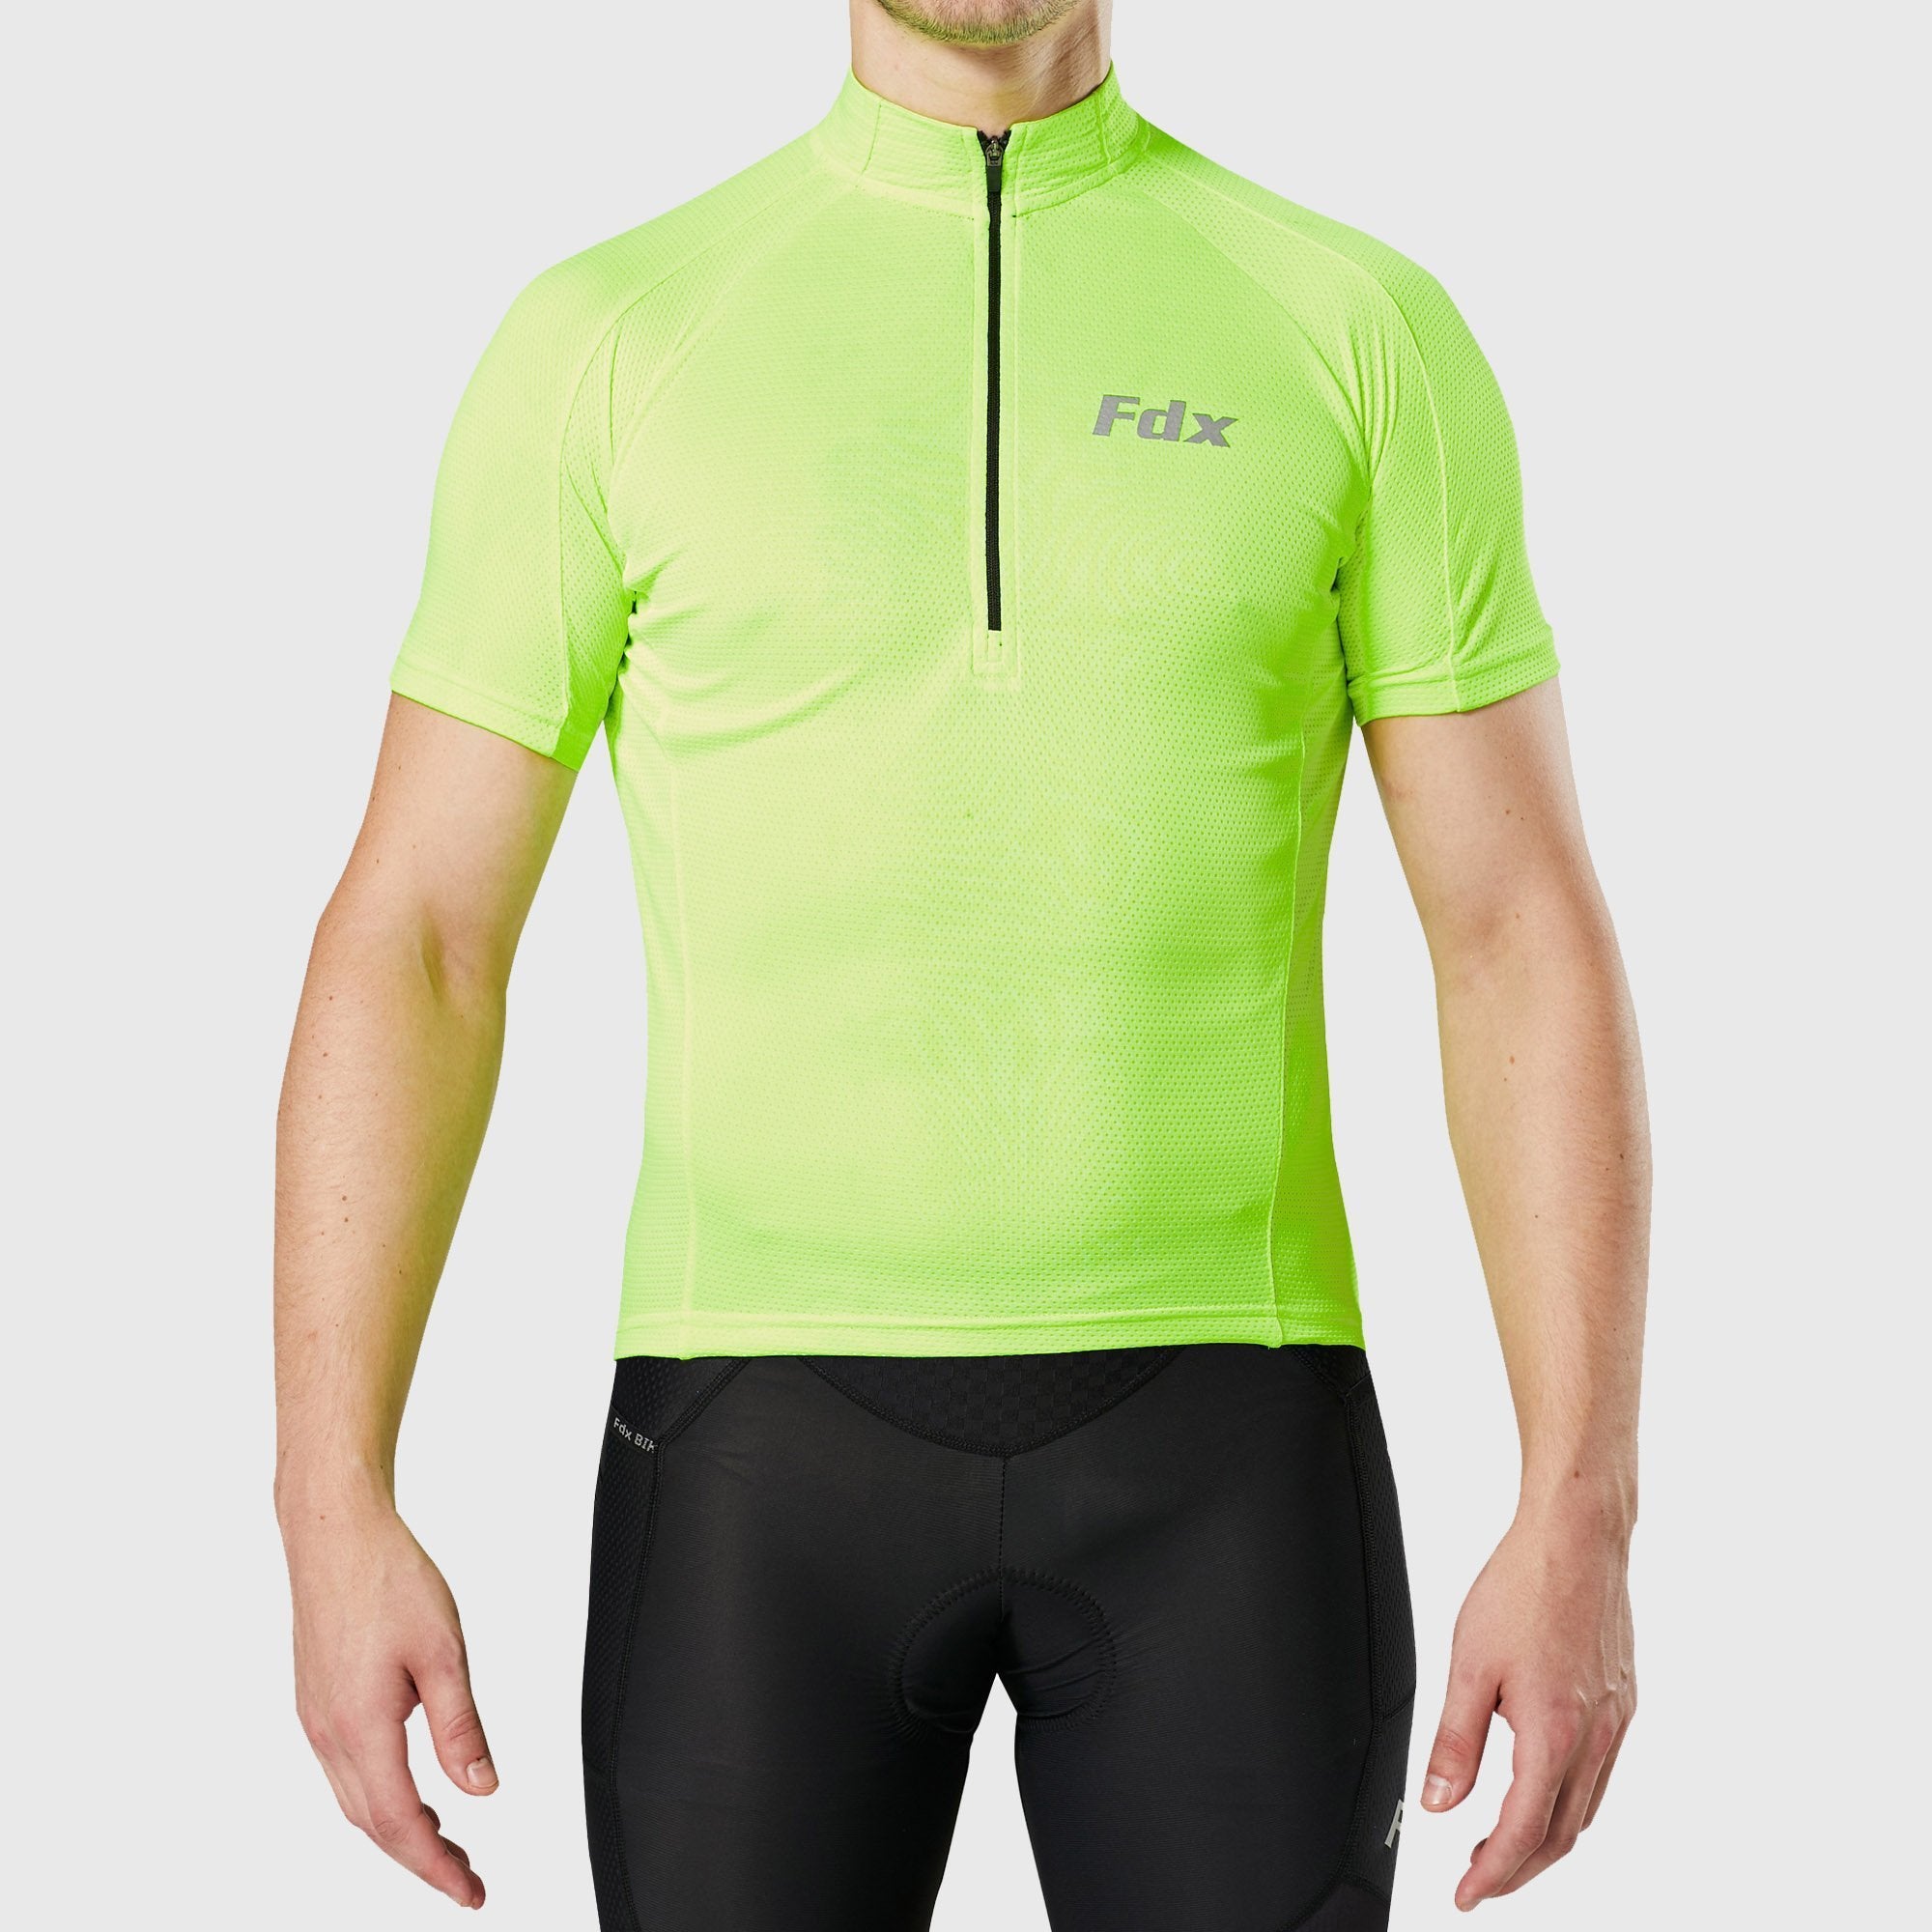  Fdx Yellow best short sleeves men’s cycling jersey breathable lightweight hi-viz Reflective details summer biking top, full zip skin friendly half sleeves mesh cycling shirt for indoor & outdoor riding with two back & 1 zip pockets